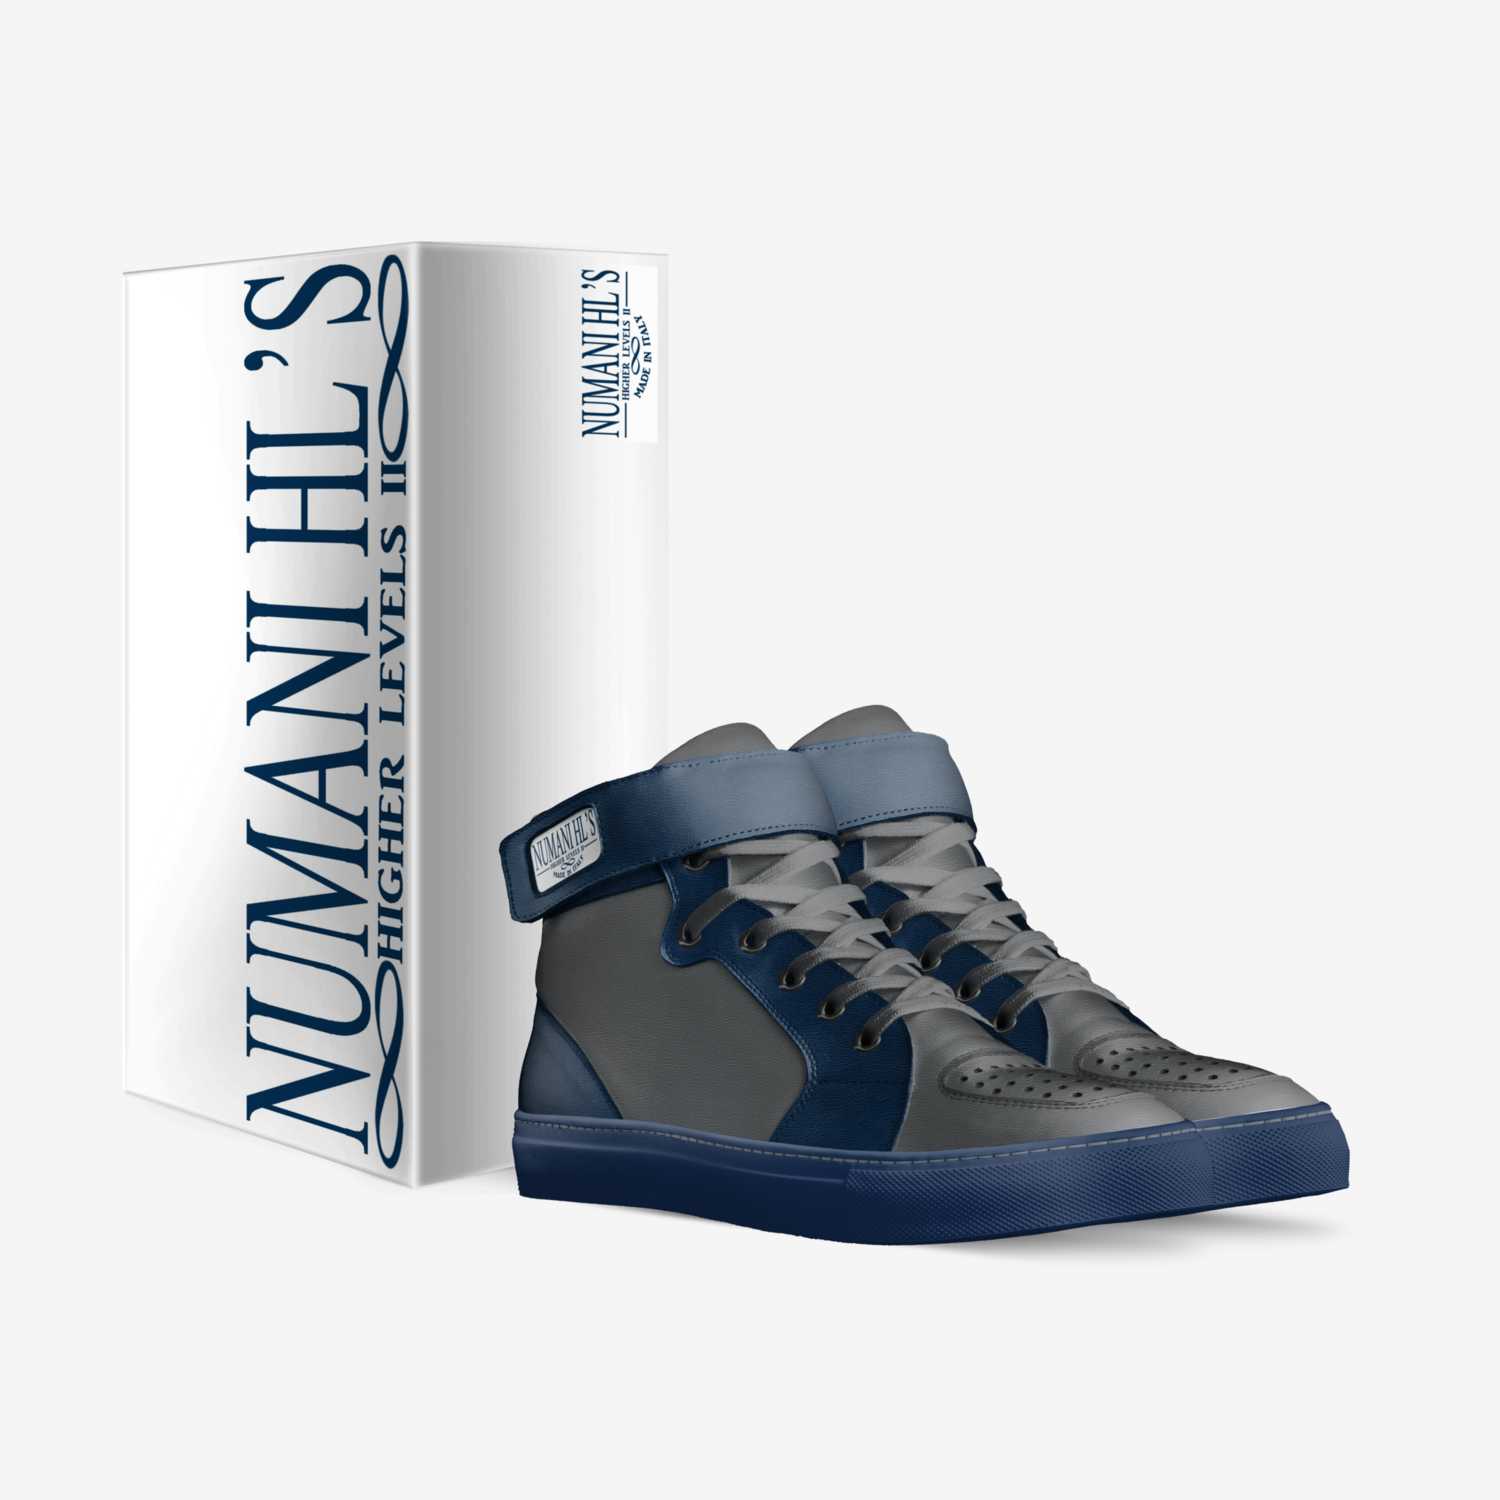 NUMANI HL'S II custom made in Italy shoes by Numani Clothing & Co. | Box view